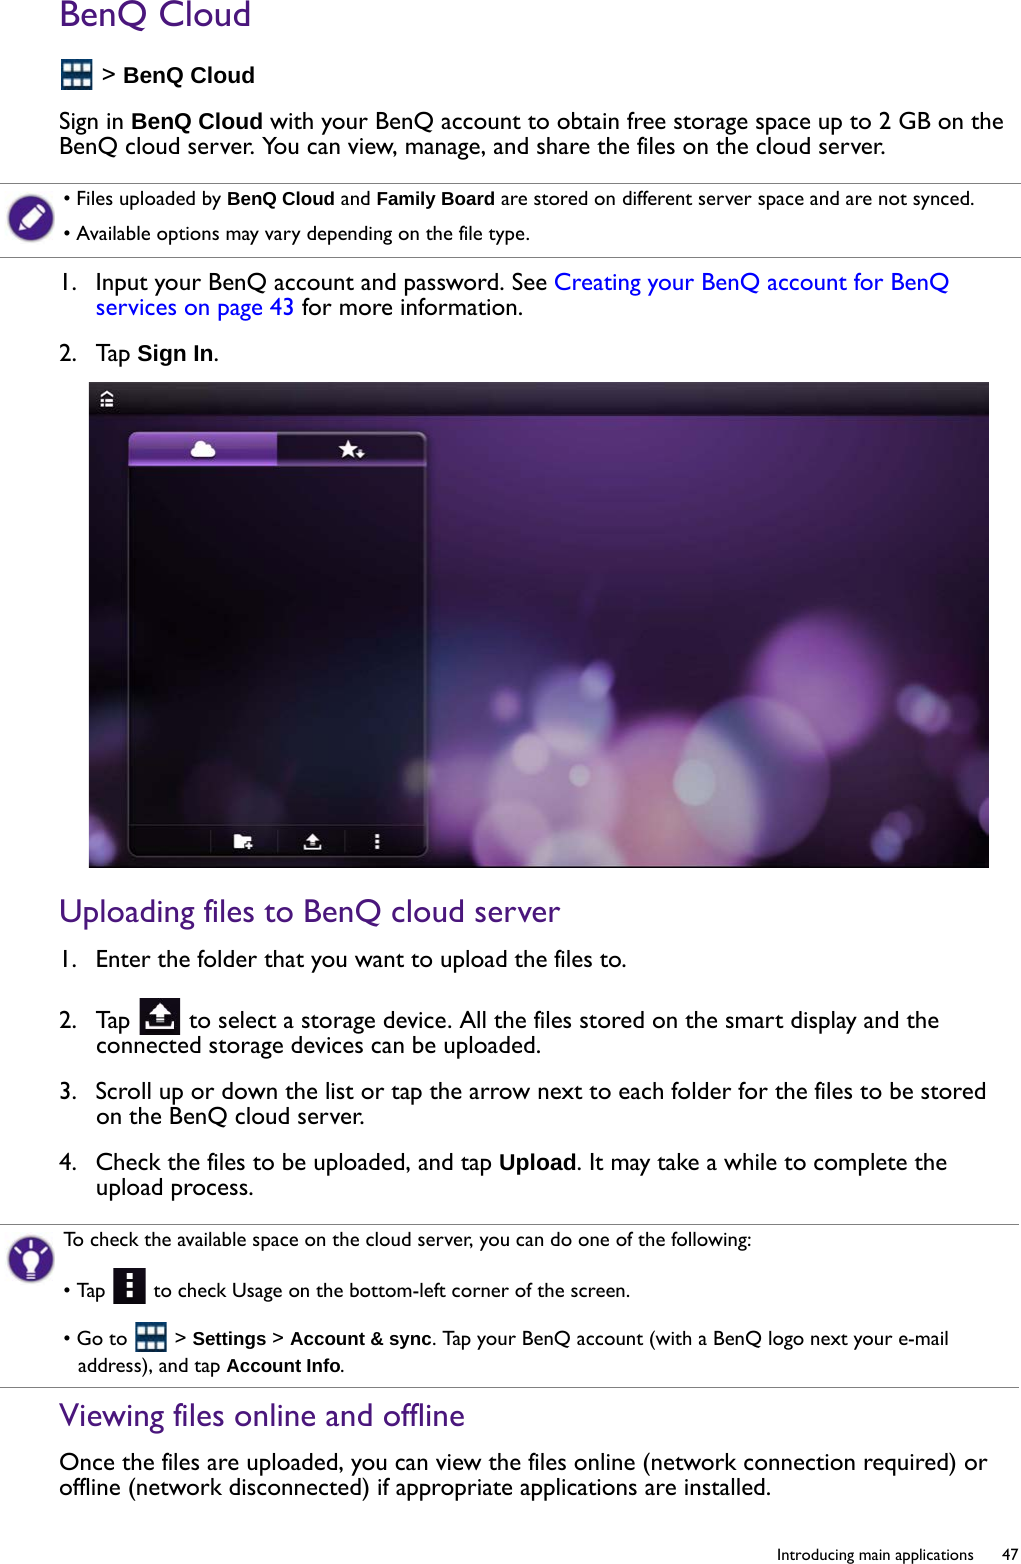   47  Introducing main applicationsBenQ Cloud &gt; BenQ CloudSign in BenQ Cloud with your BenQ account to obtain free storage space up to 2 GB on the BenQ cloud server. You can view, manage, and share the files on the cloud server.1.  Input your BenQ account and password. See Creating your BenQ account for BenQ services on page 43 for more information.2.  Tap Sign In.Uploading files to BenQ cloud server1.  Enter the folder that you want to upload the files to.2.  Tap   to select a storage device. All the files stored on the smart display and the connected storage devices can be uploaded. 3.  Scroll up or down the list or tap the arrow next to each folder for the files to be stored on the BenQ cloud server.4.  Check the files to be uploaded, and tap Upload. It may take a while to complete the upload process.Viewing files online and offlineOnce the files are uploaded, you can view the files online (network connection required) or offline (network disconnected) if appropriate applications are installed.• Files uploaded by BenQ Cloud and Family Board are stored on different server space and are not synced.• Available options may vary depending on the file type.To check the available space on the cloud server, you can do one of the following:• Tap   to check Usage on the bottom-left corner of the screen.• Go to   &gt; Settings &gt; Account &amp; sync. Tap your BenQ account (with a BenQ logo next your e-mail address), and tap Account Info.